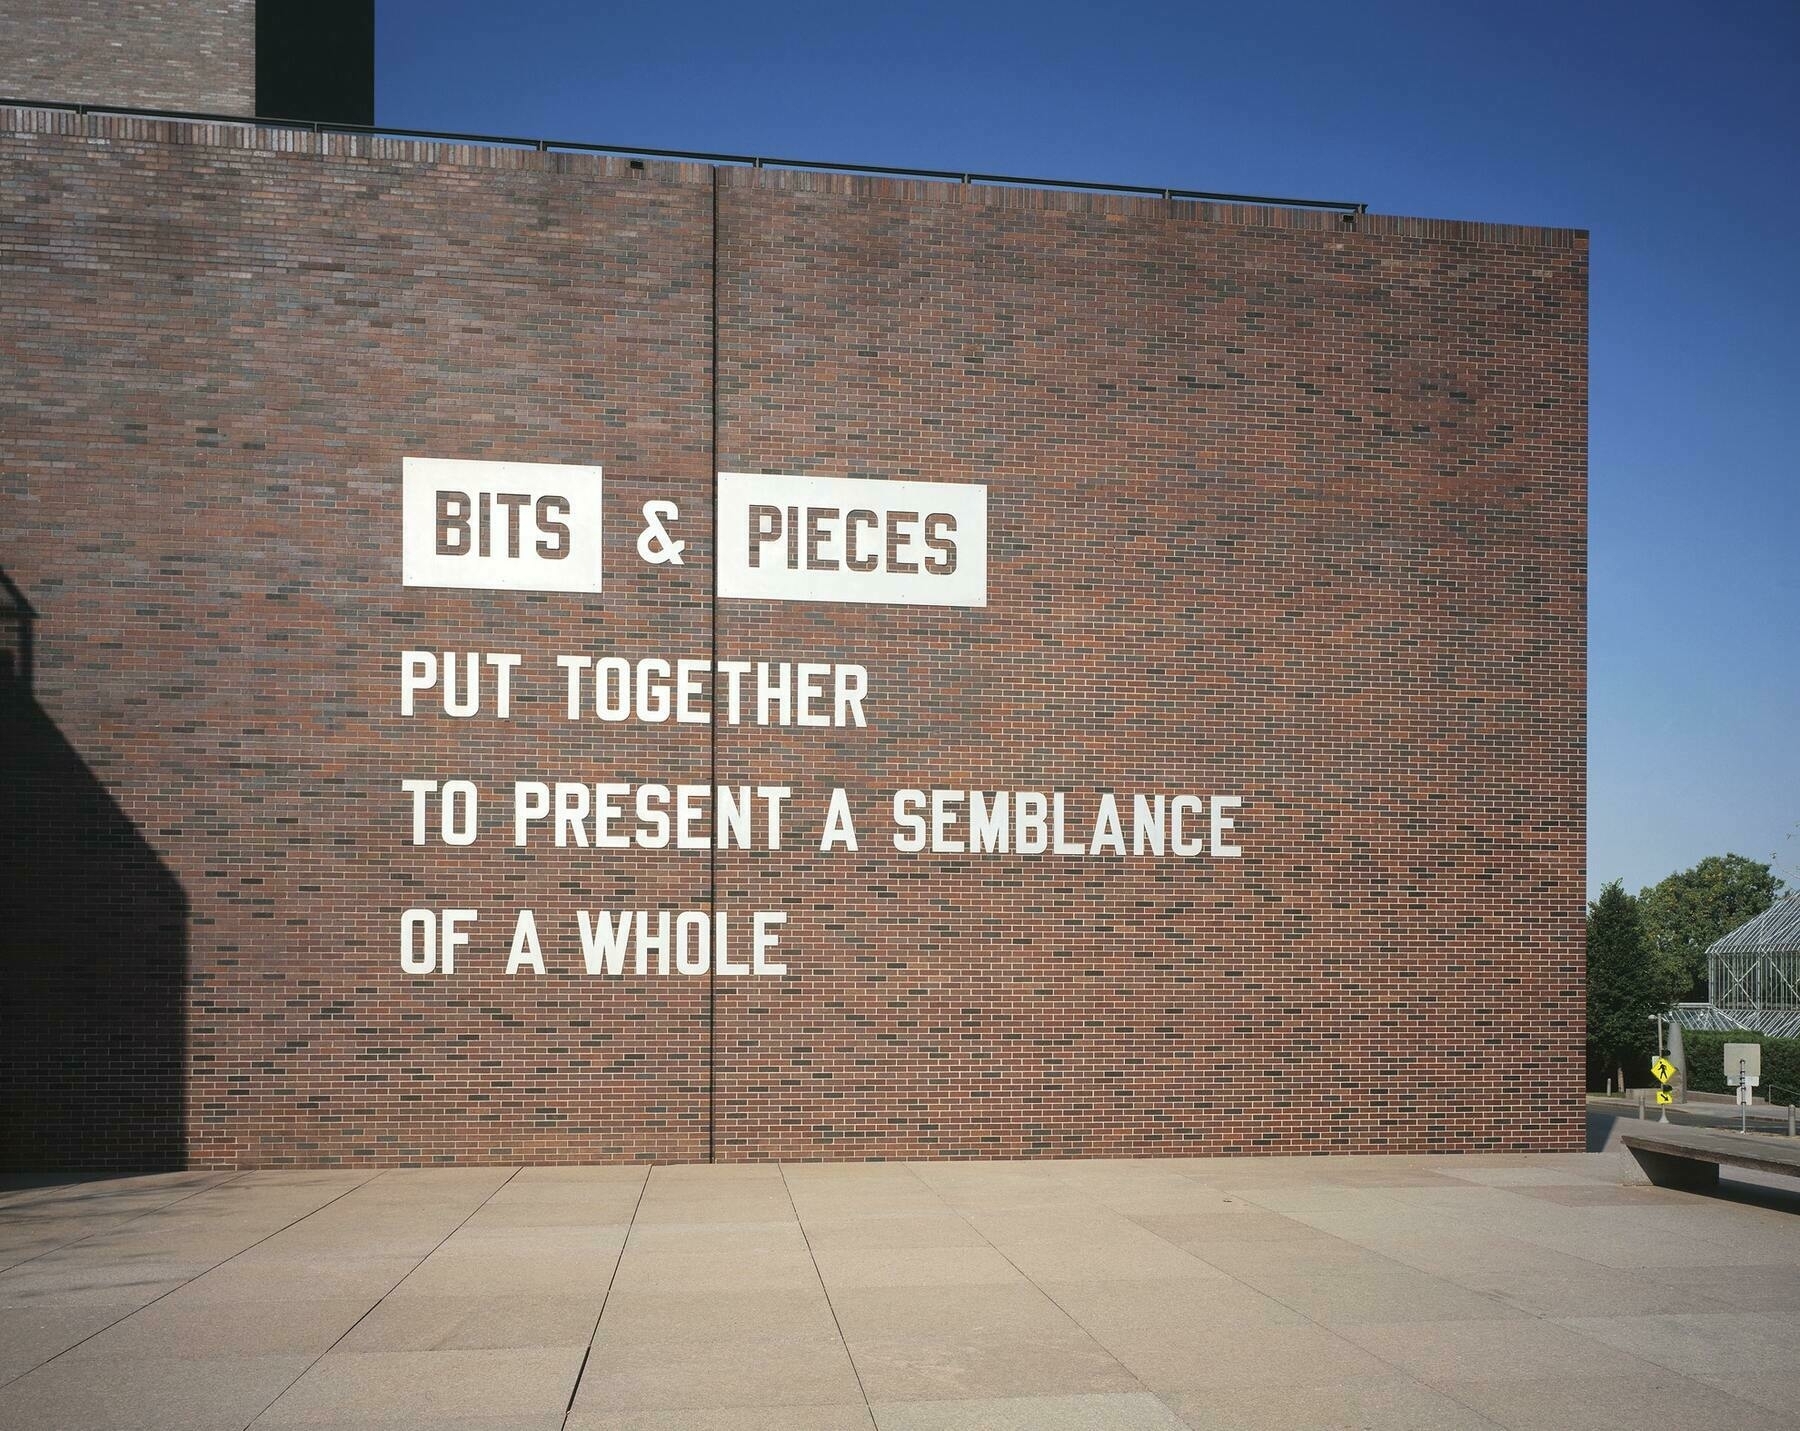 An artwork by Lawrence Weiner, entitled Bits and pieces put together to present a semblance of a whole